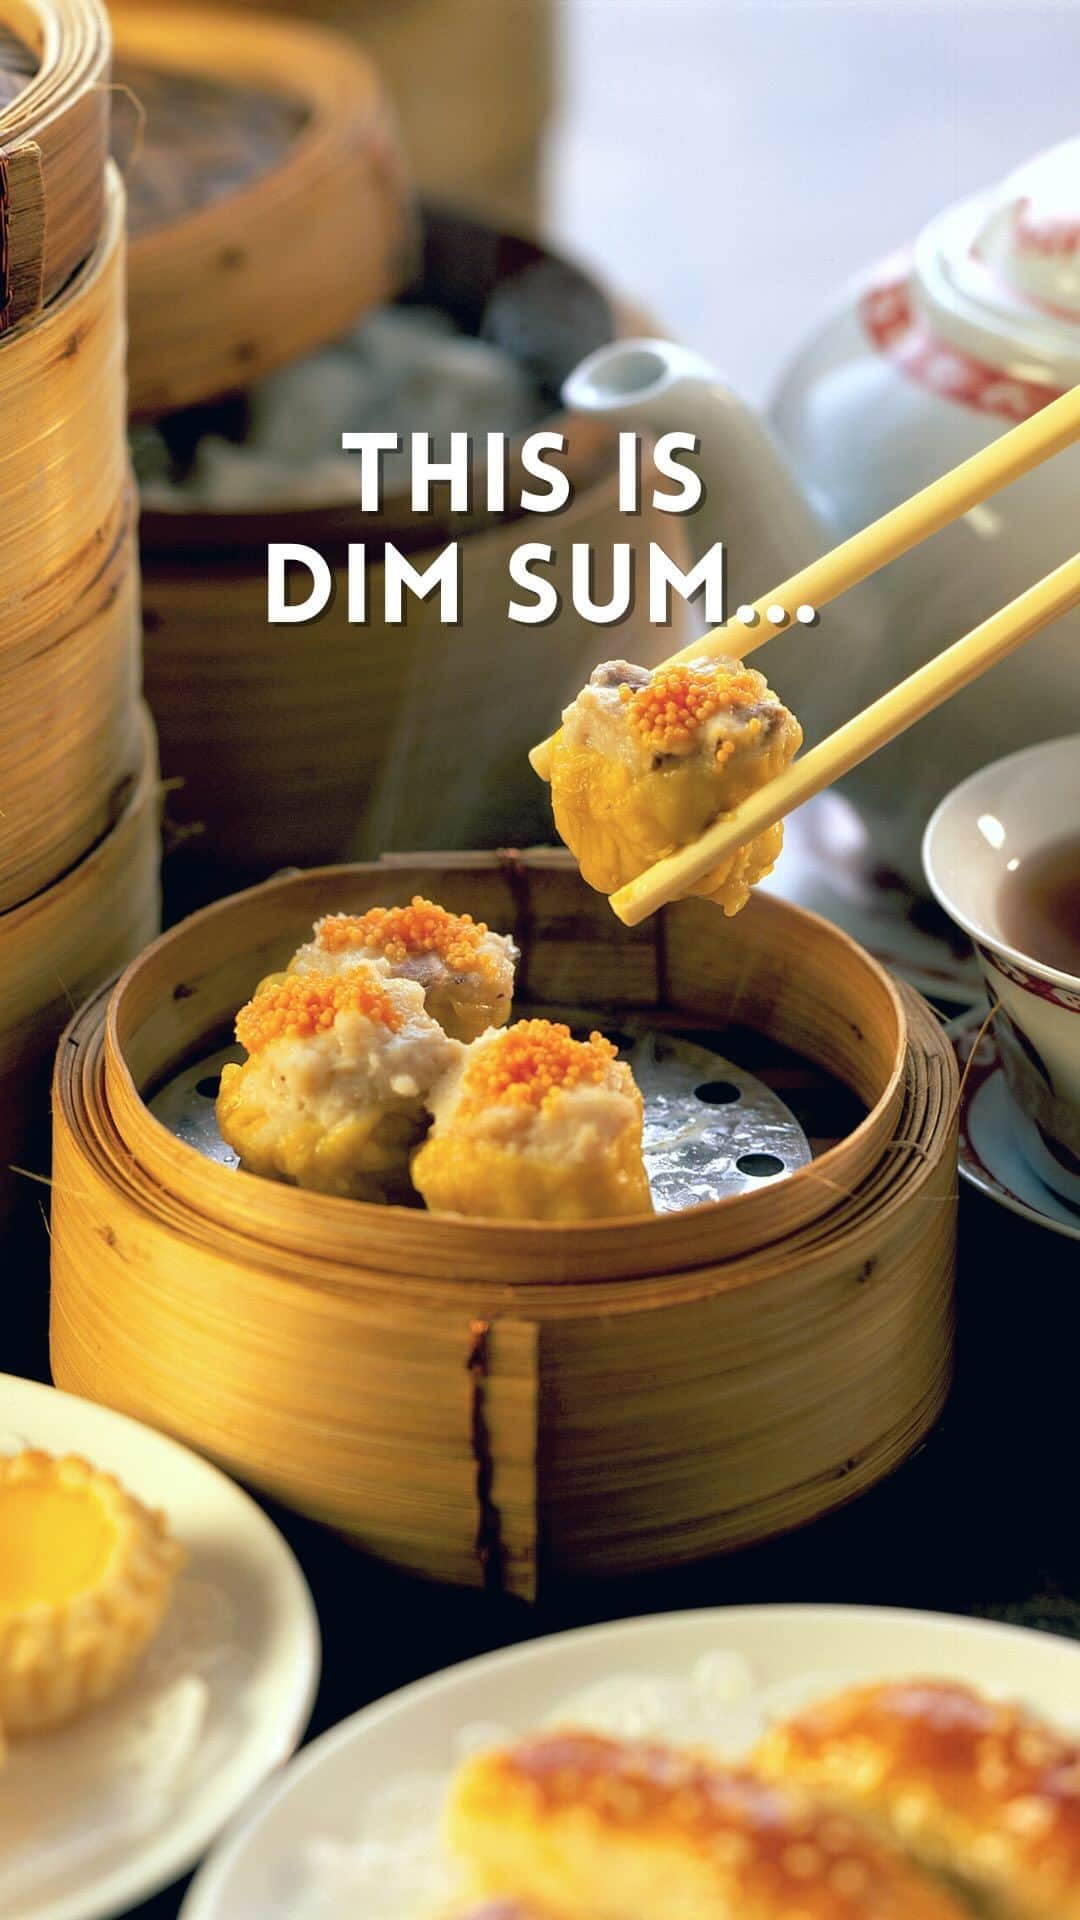 Discover Hong Kongのインスタグラム：「Having a craving for dim sum? 🥟Whether you’re in the mood for authentic flavors from cozy local diners🍵 or indulging in a fancy feast with a panoramic view🏙️, Hong Kong has it all!✨ So grab your chopsticks and let’s dig in!🥢😋  準備好大擦一餐食好點心未？🥟無論你想喺傳統茶樓嘆一盅兩件🍵，抑或想轉換環境享受住海風品嚐新式點心，我哋總有地方可以滿足你！無須猶豫，即刻拎起筷子，細味各種粵菜體驗啦～🥢😋  📍: Lin Heung Kui 蓮香居 📍： @aqualunahk   #DimSum #HelloHongKong #DiscoverHongKong 🥢😋🥢😋🥢😋🥢😋🥢😋🥢😋🥢😋🥢😋🥢😋 Hong Kong welcomes you✈️! Now travellers can get ‘Hong Kong Goodies’ 🛍️vouchers including one FREE welcome drink🍸 in the hottest bars! Check out the details here: bit.ly/HelloHKgoodiesEN. Hope to see you all soon! 香港歡迎你✈️！而家遊客仲可以享用「香港有禮🛍️」消費優惠券，去得獎酒吧免費飲返杯🍸🍹！詳情請留意 bit.ly/HelloHKgoodiesTC」